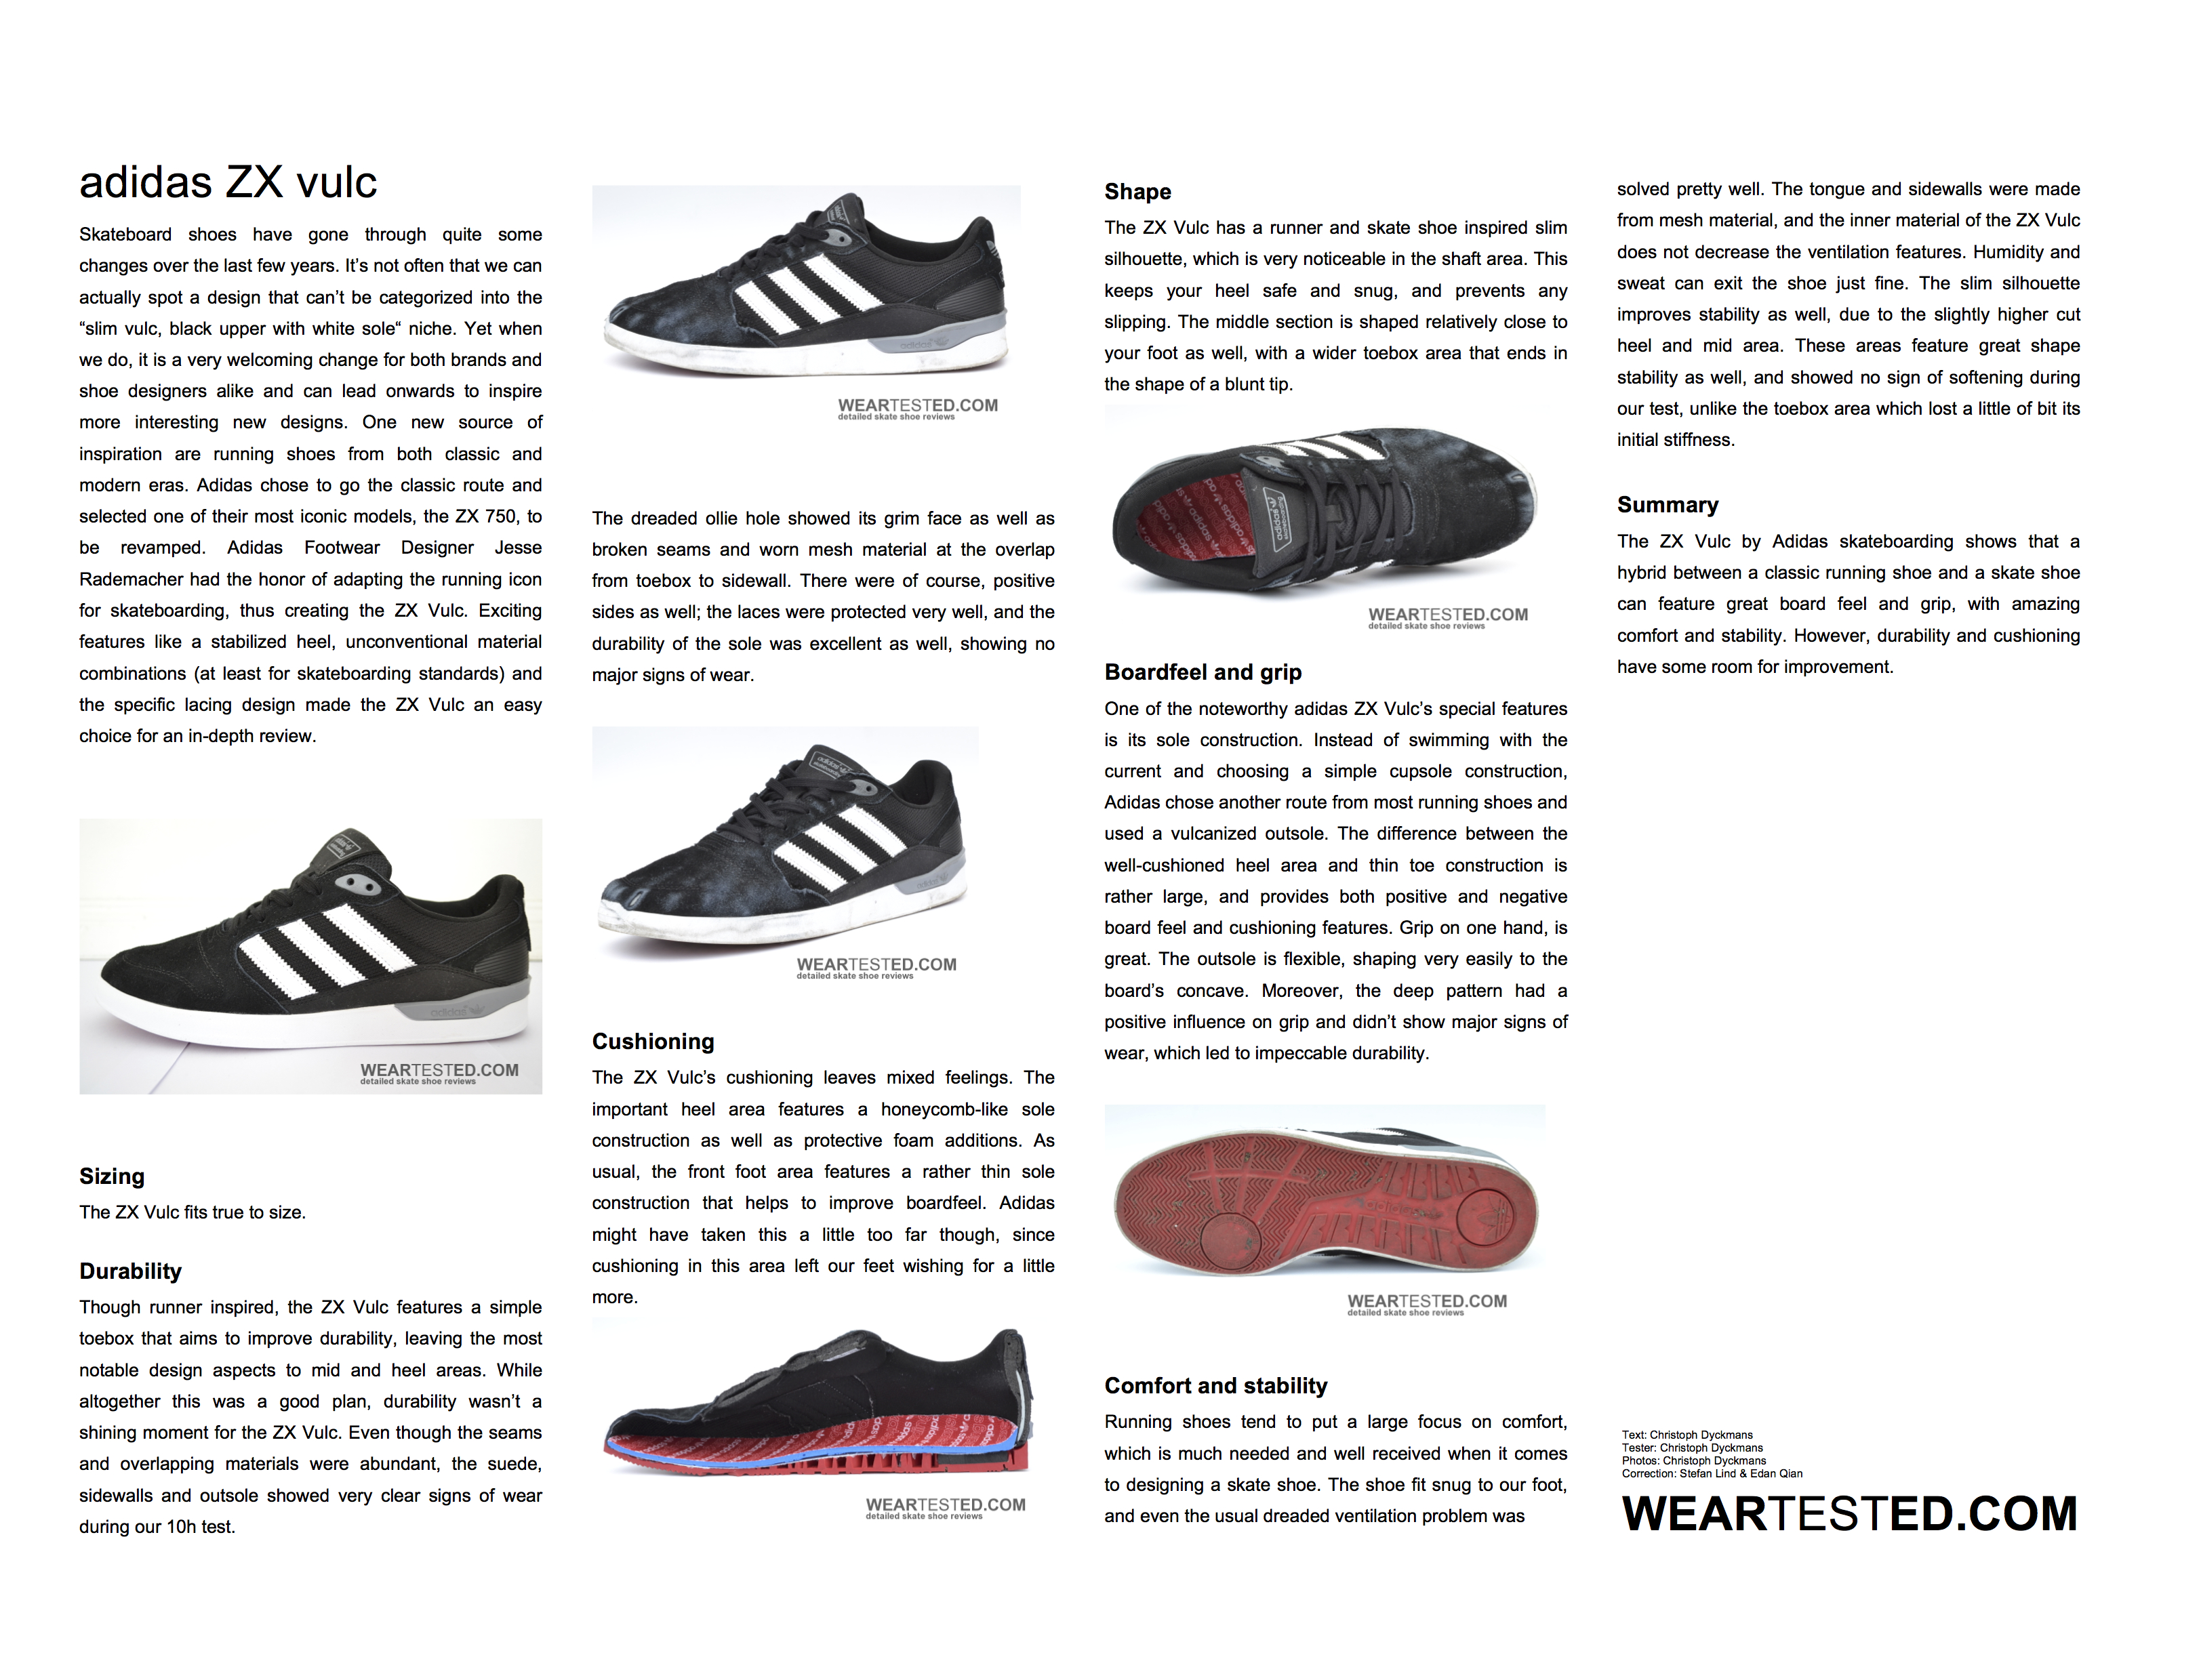 adidas ZX vulc - Weartested - detailed 